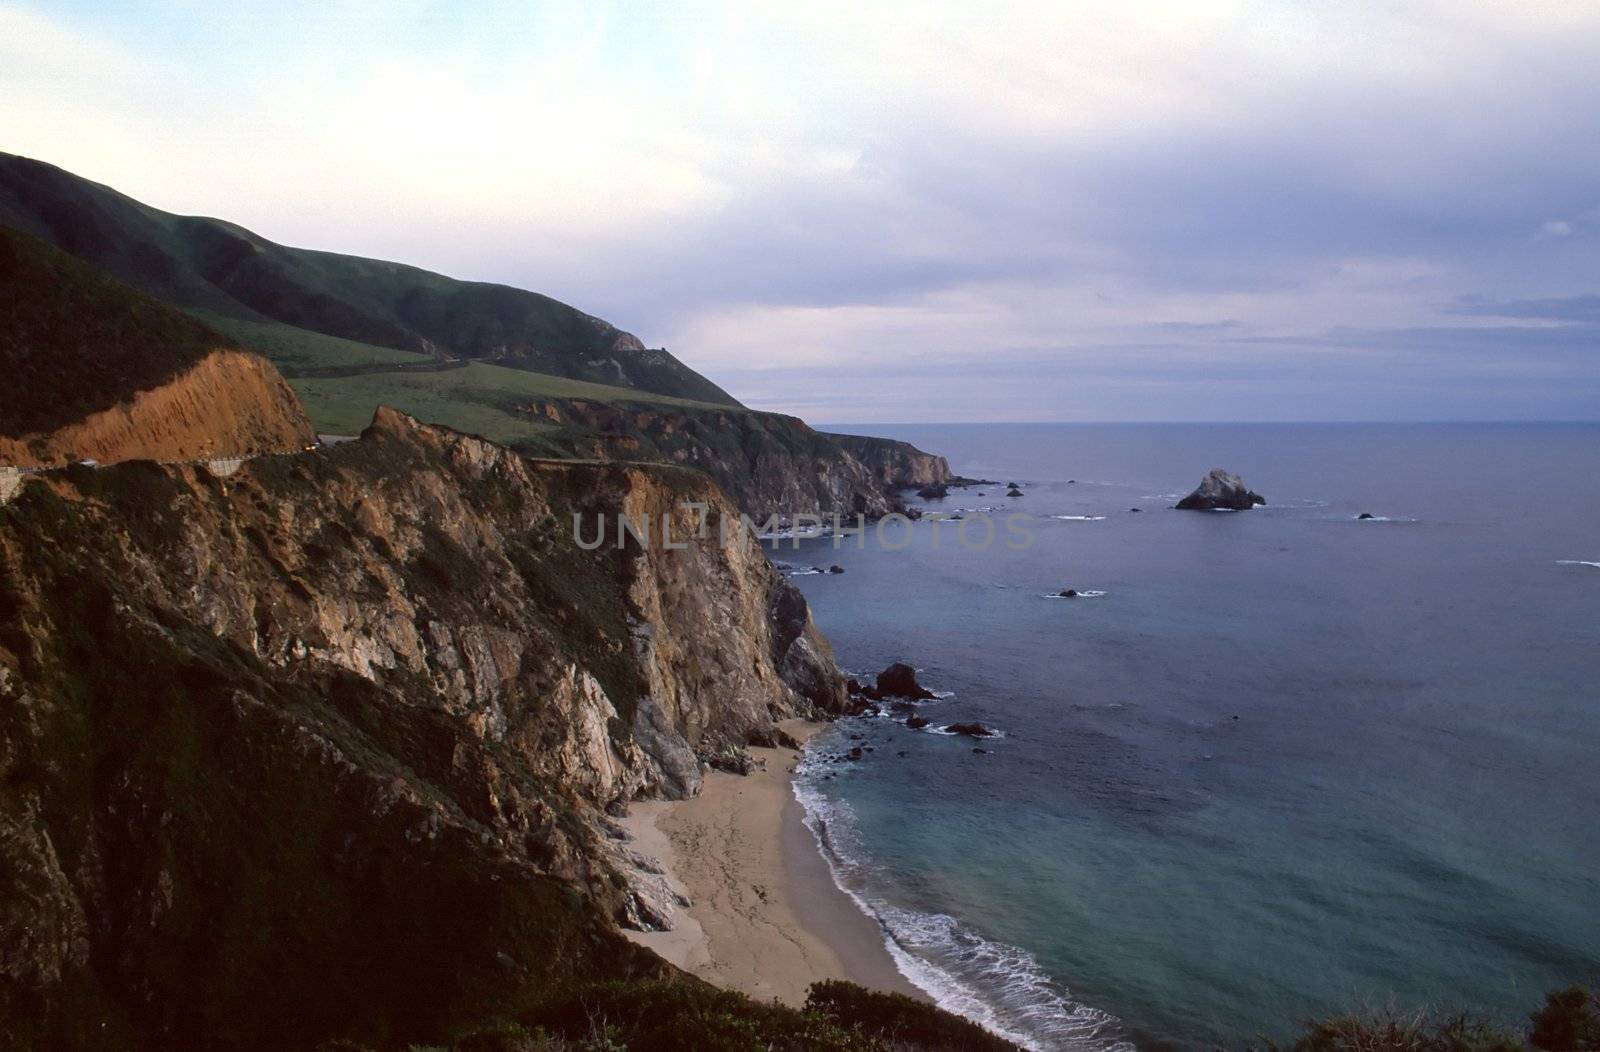 Big Sur is a sparsely populated region of the central California, United States coast where the Santa Lucia Mountains rise abruptly from the Pacific Ocean.